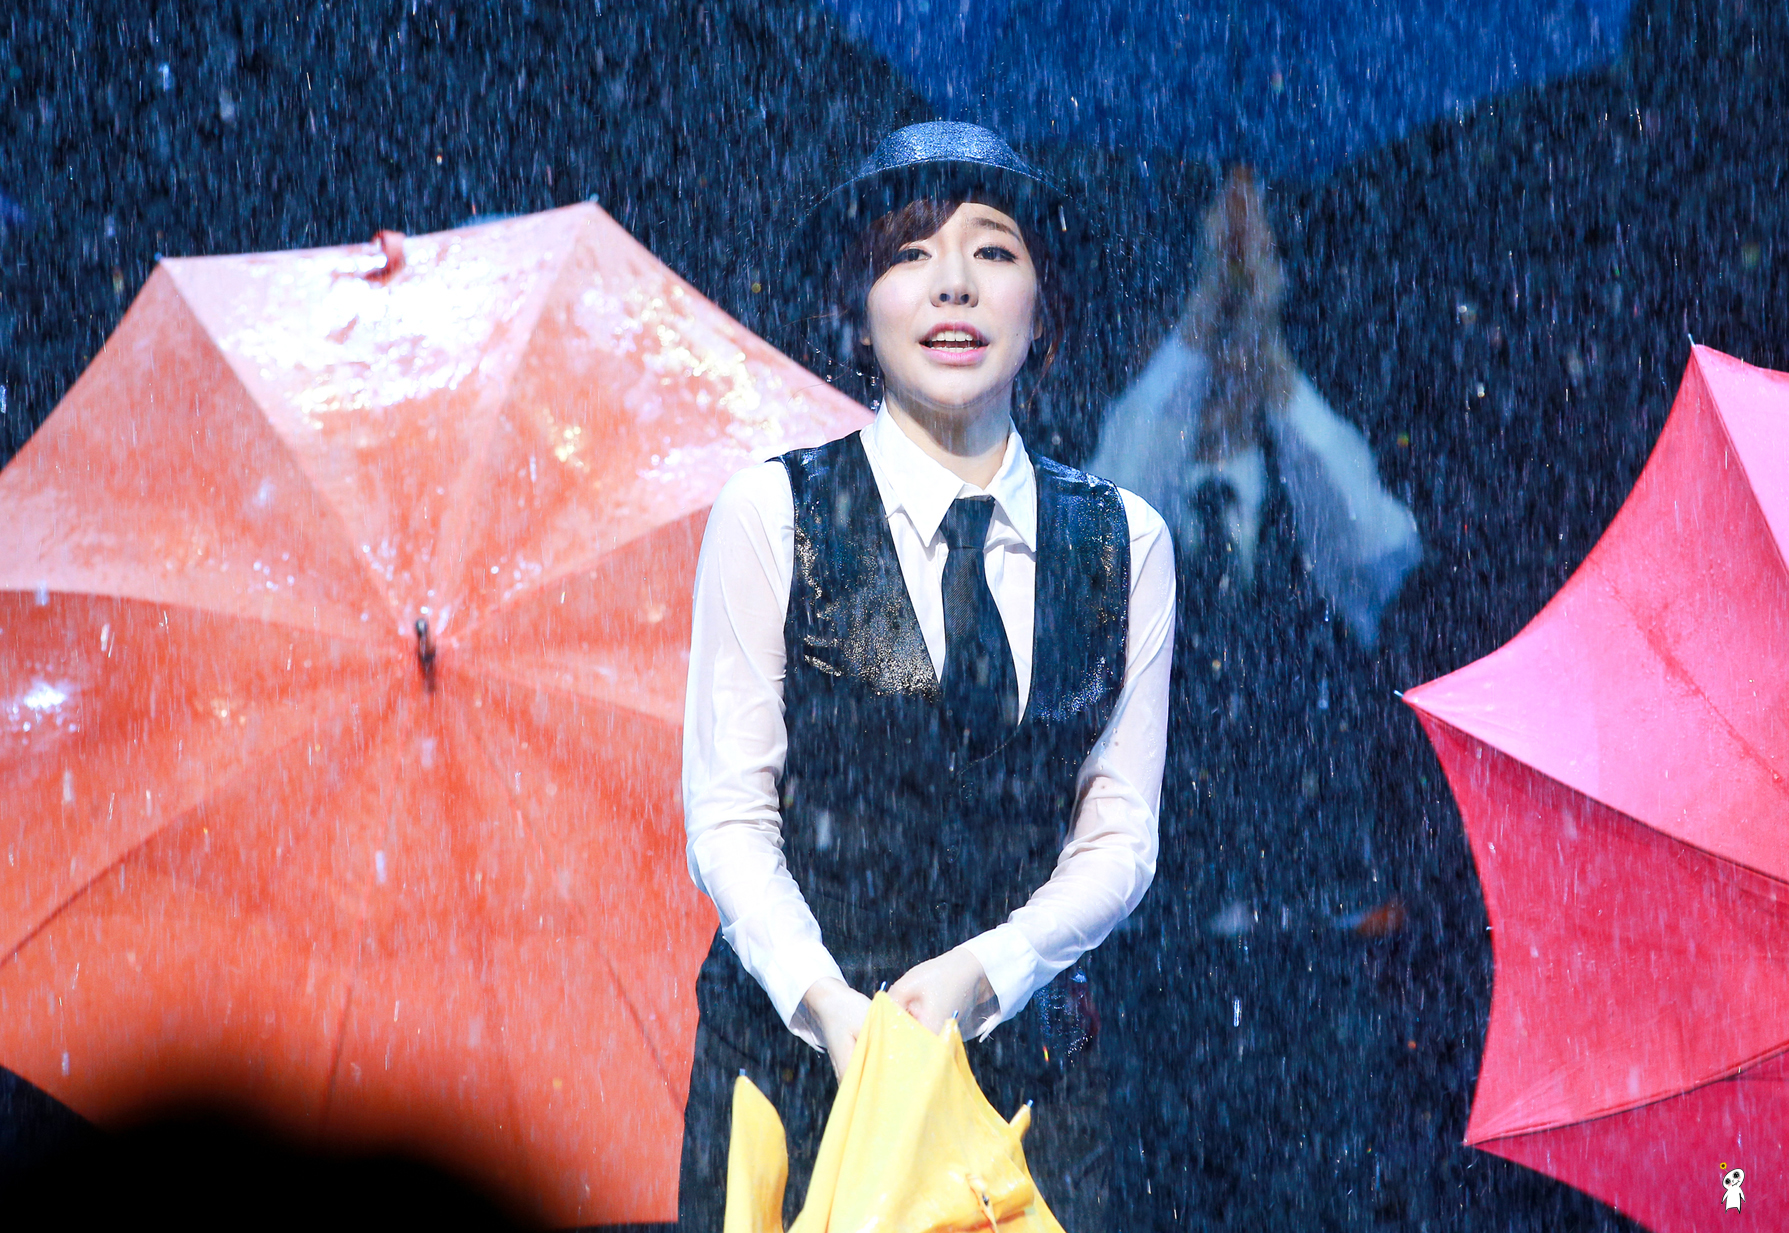 [OTHER][29-04-2014]Sunny sẽ tham gia vở nhạc kịch "SINGIN' IN THE RAIN" - Page 6 2110003953DAEFB4144EE3